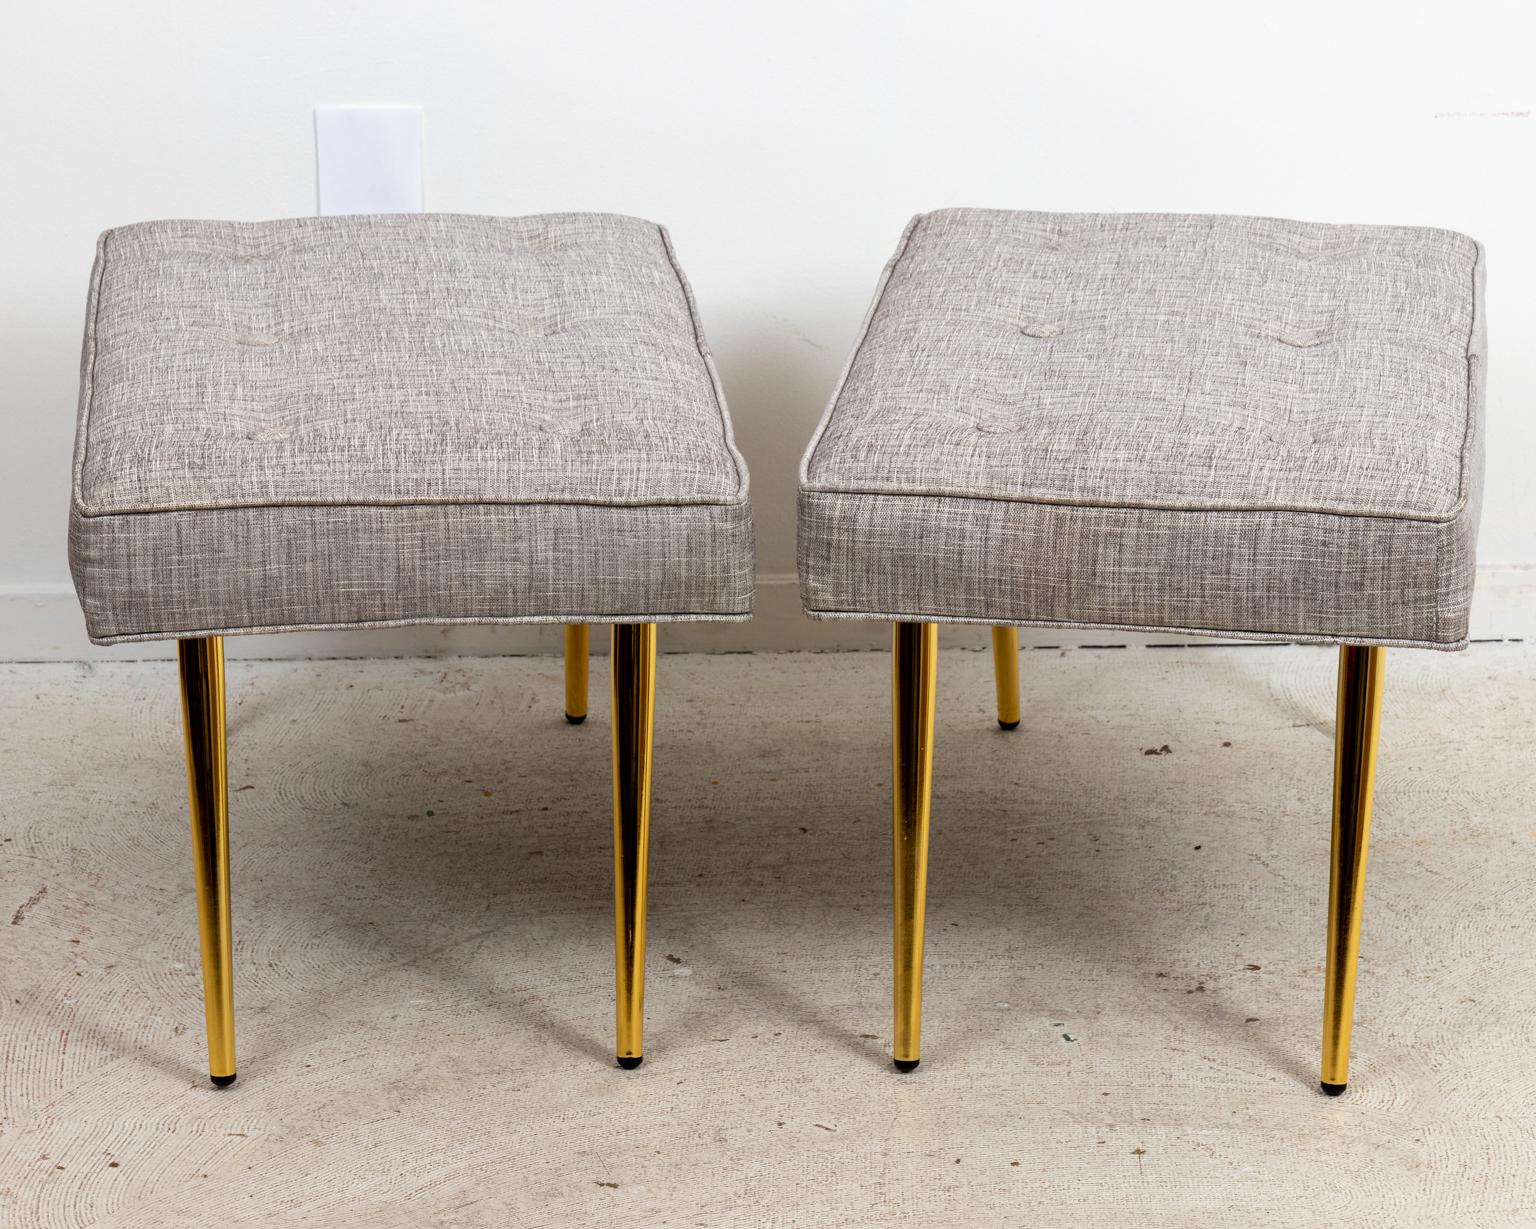 circa 21st century Mid-Century Modern style pair of benches, newly upholstered with tufted seats. The piece measures 30.00 Inches by 18.00 Inches by 18.00 Inches.